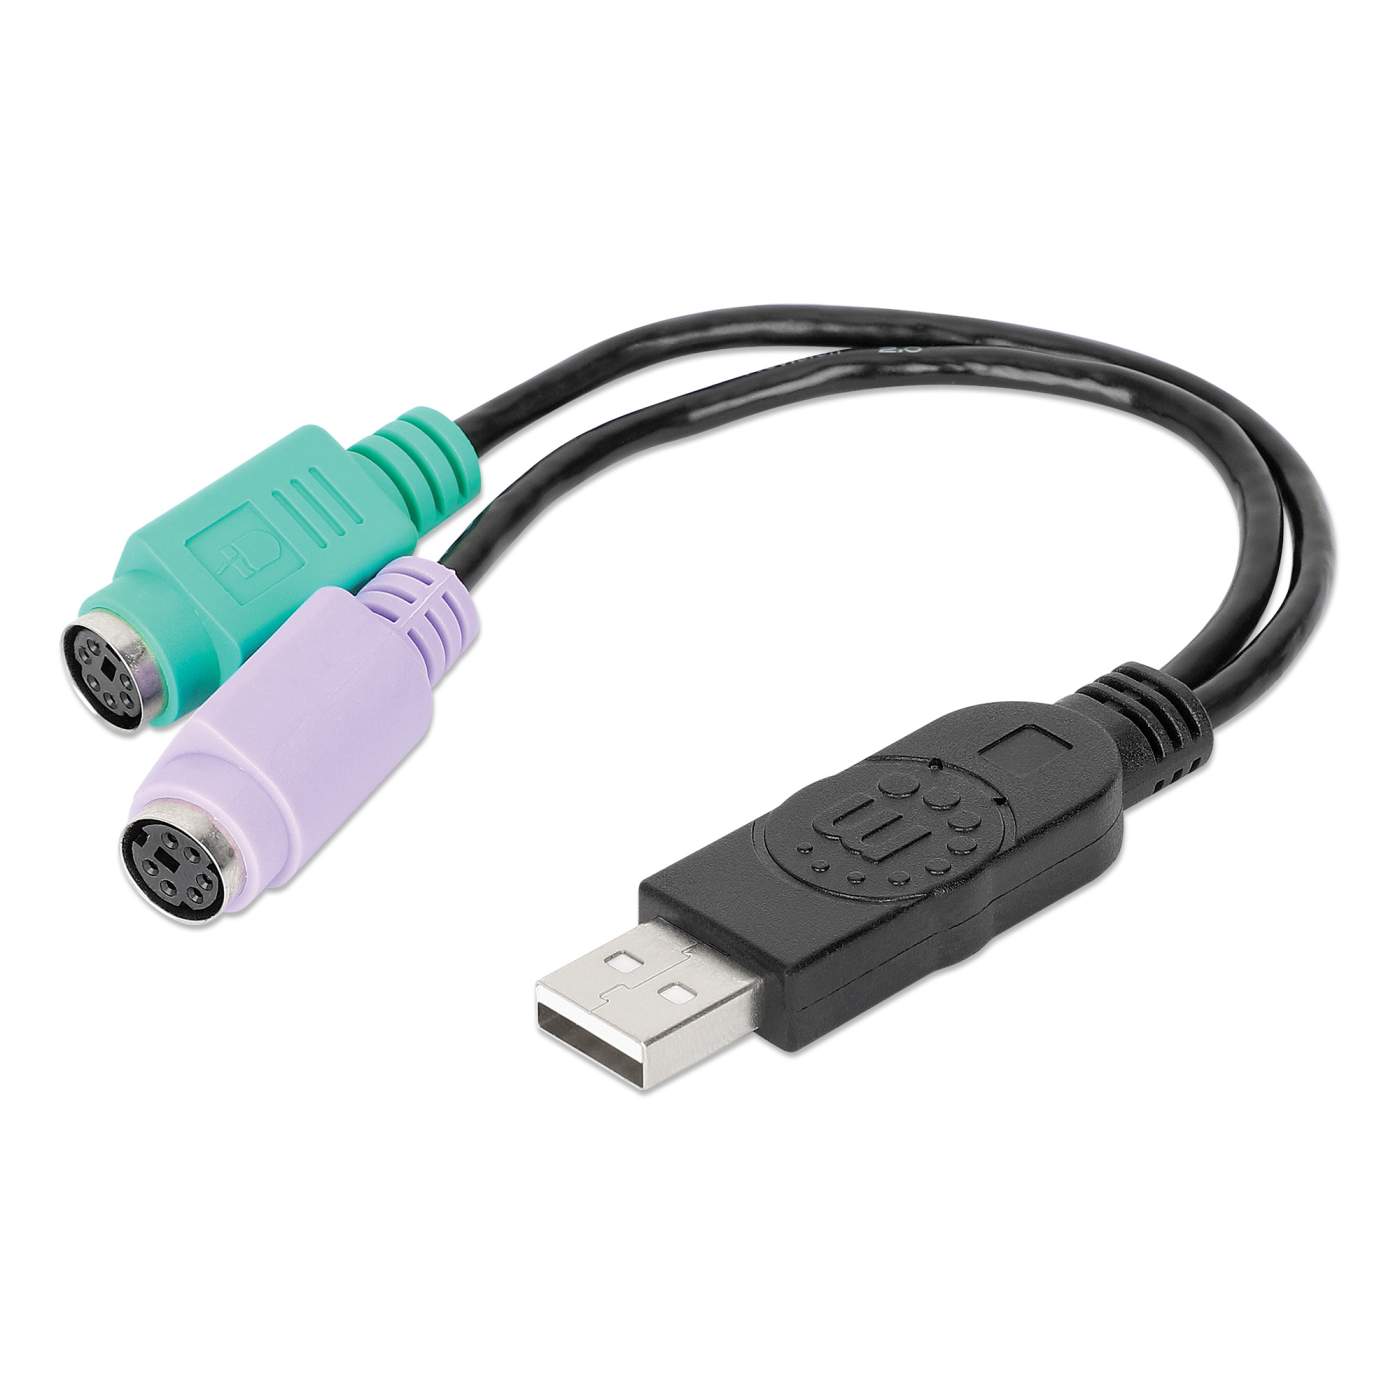 Ps2 to hdmi adapter audio converter, CATEGORIES \ Electronics \ Adapters